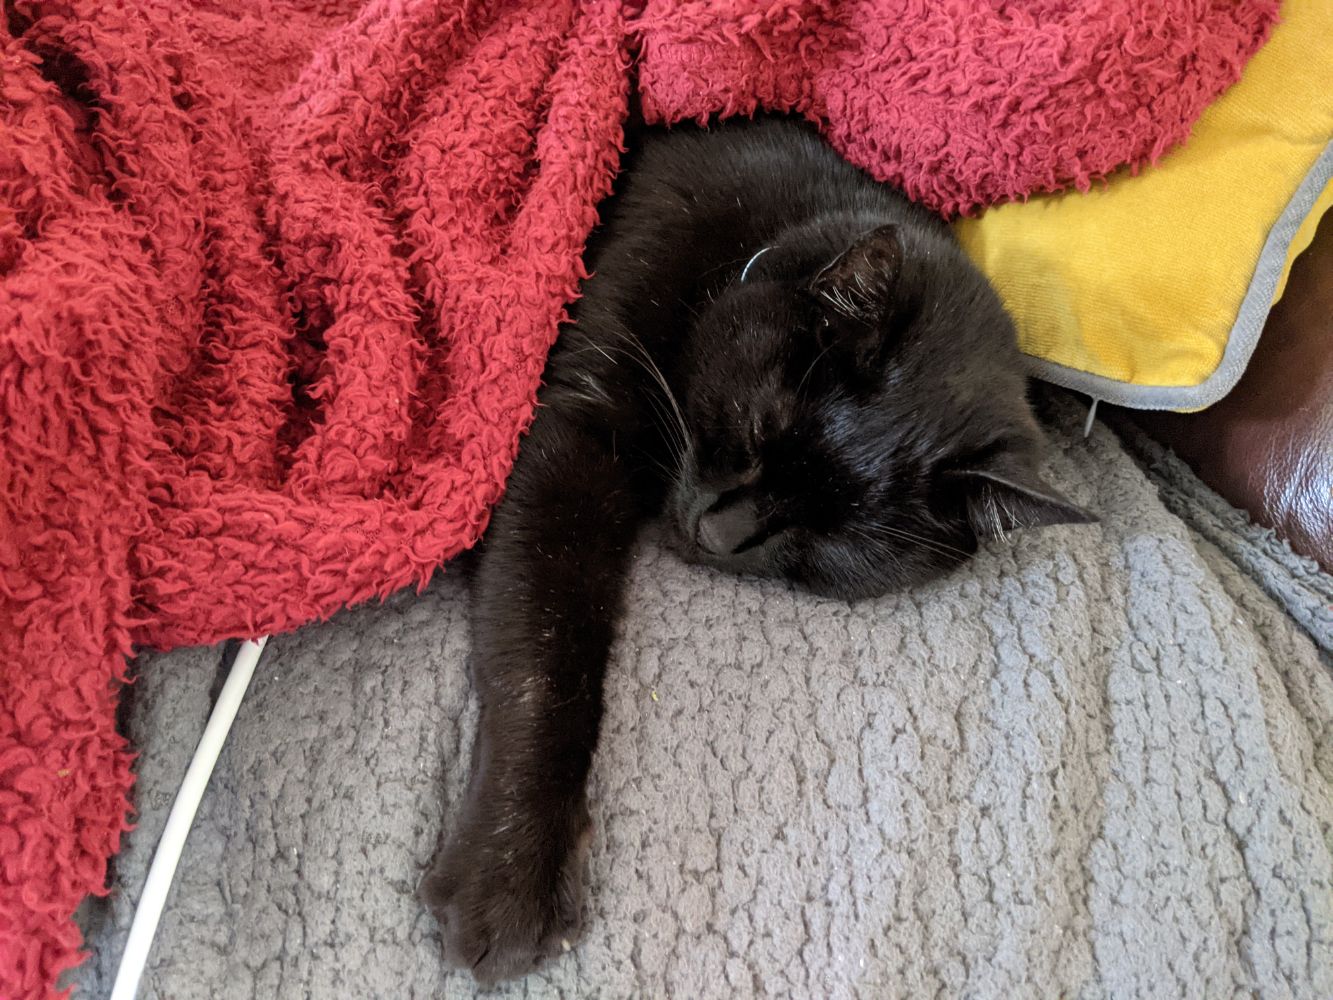 Black cat (Morph) lying on a grey blanket, with a red blanket wrapped around him, his arm outstretched, and looking very content and sleepy